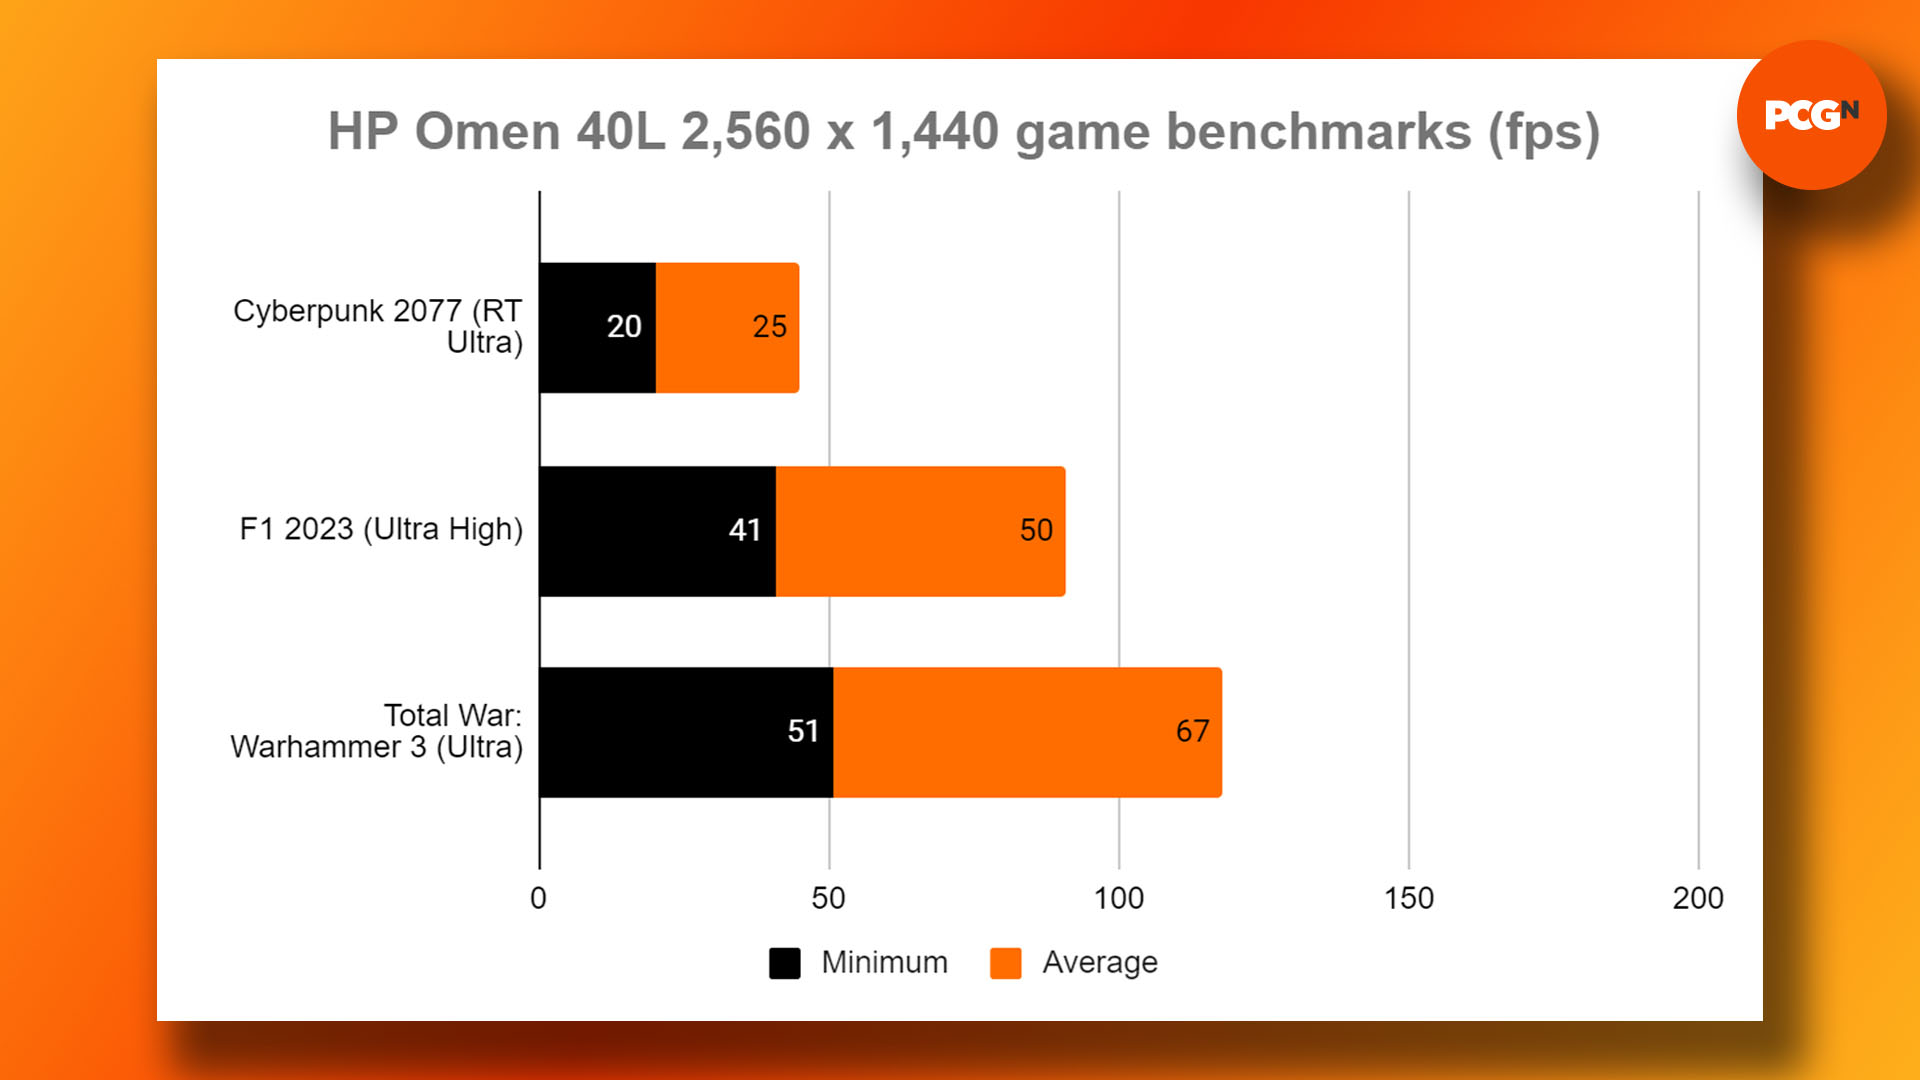 HP Omen 40L review: 1440p Cyberpunk 2077, F1 23, and Warhammer III: Total War game benchmark results graph